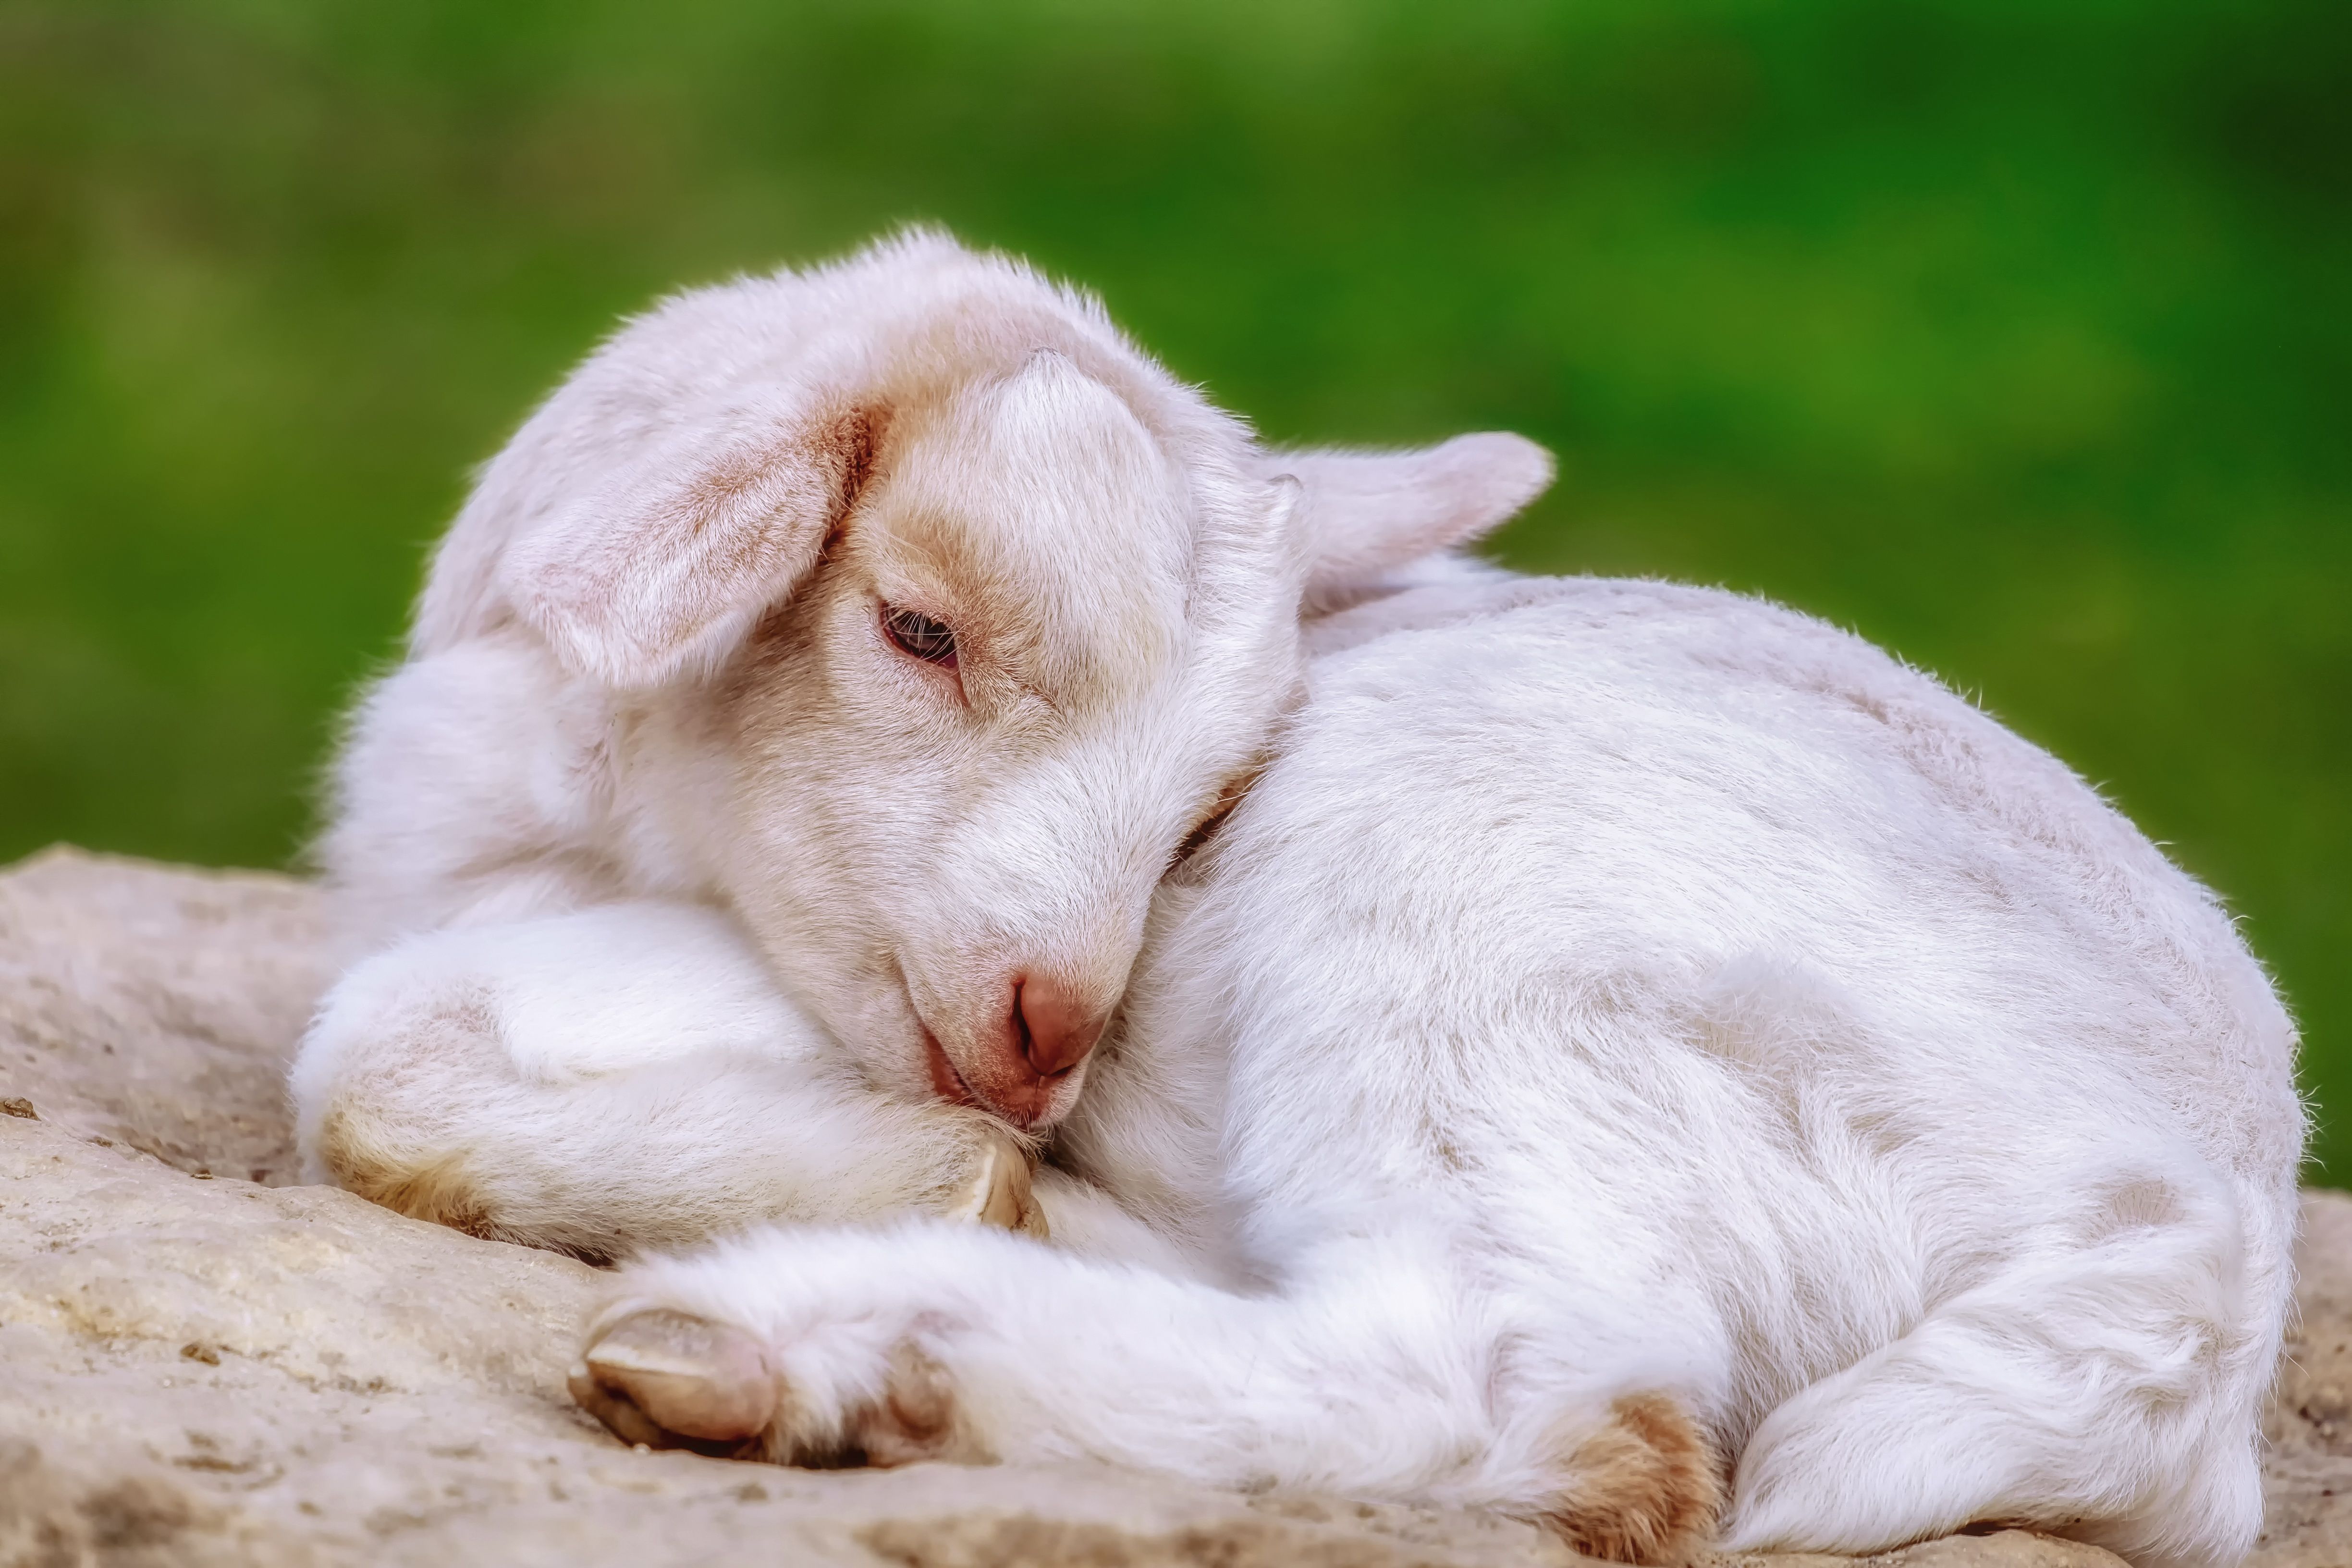 Cute White Baby Goat also Called a Kid 4k Ultra HD Wallpaper